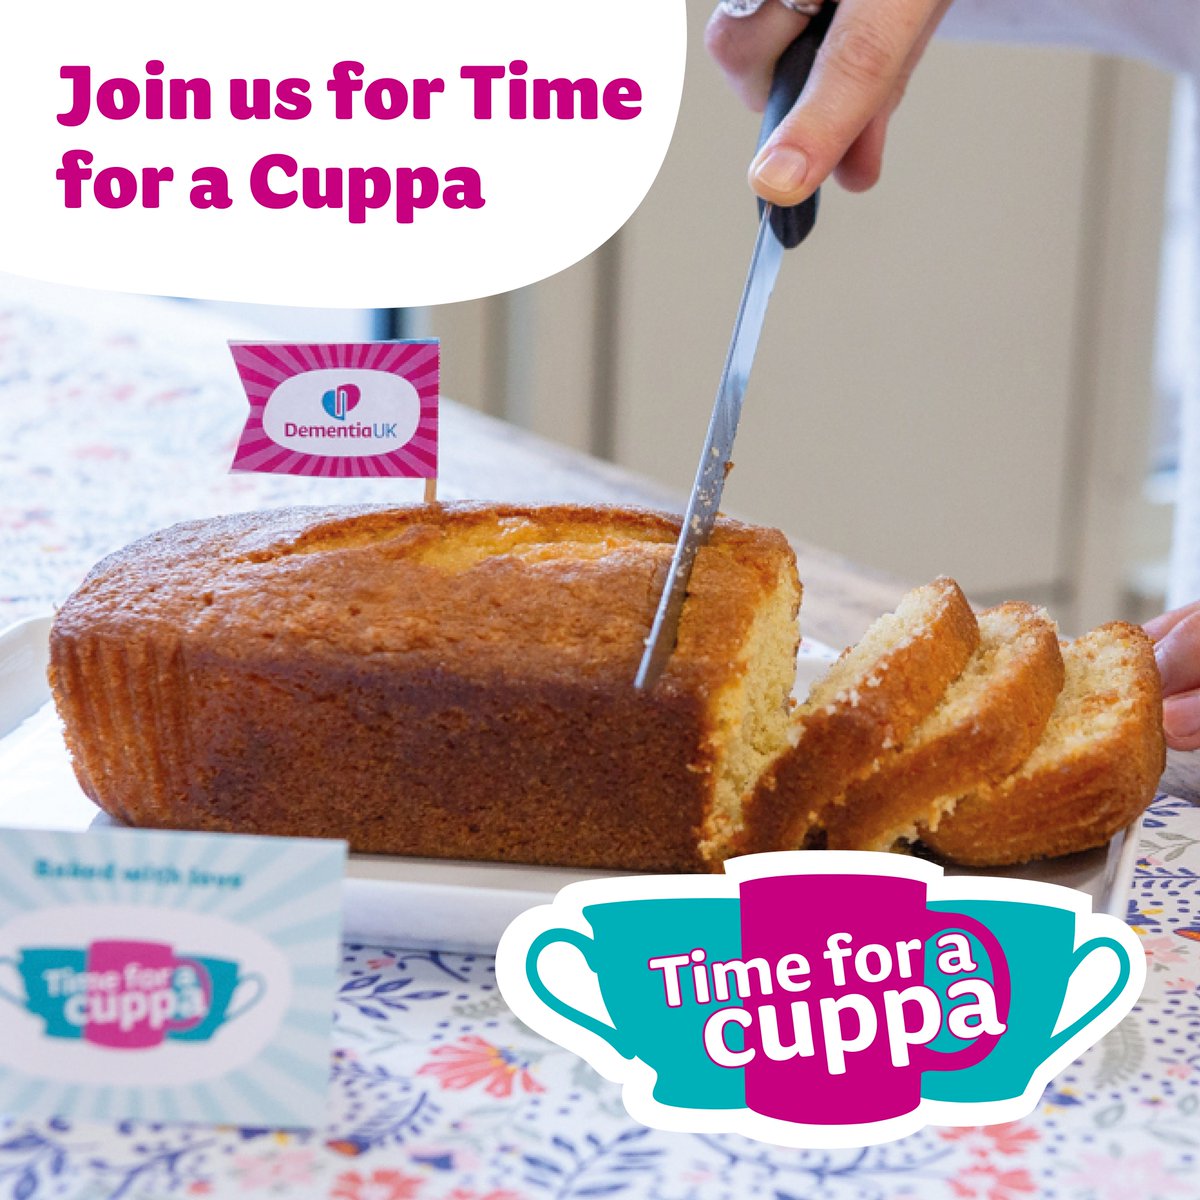 Join us for #TimeForACuppa Week! ☕

By the time you've boiled your kettle, someone new develops dementia. Let's support @DementiaUK & make, bake & brew to raise vital funds for families facing dementia. 

Every cuppa counts!